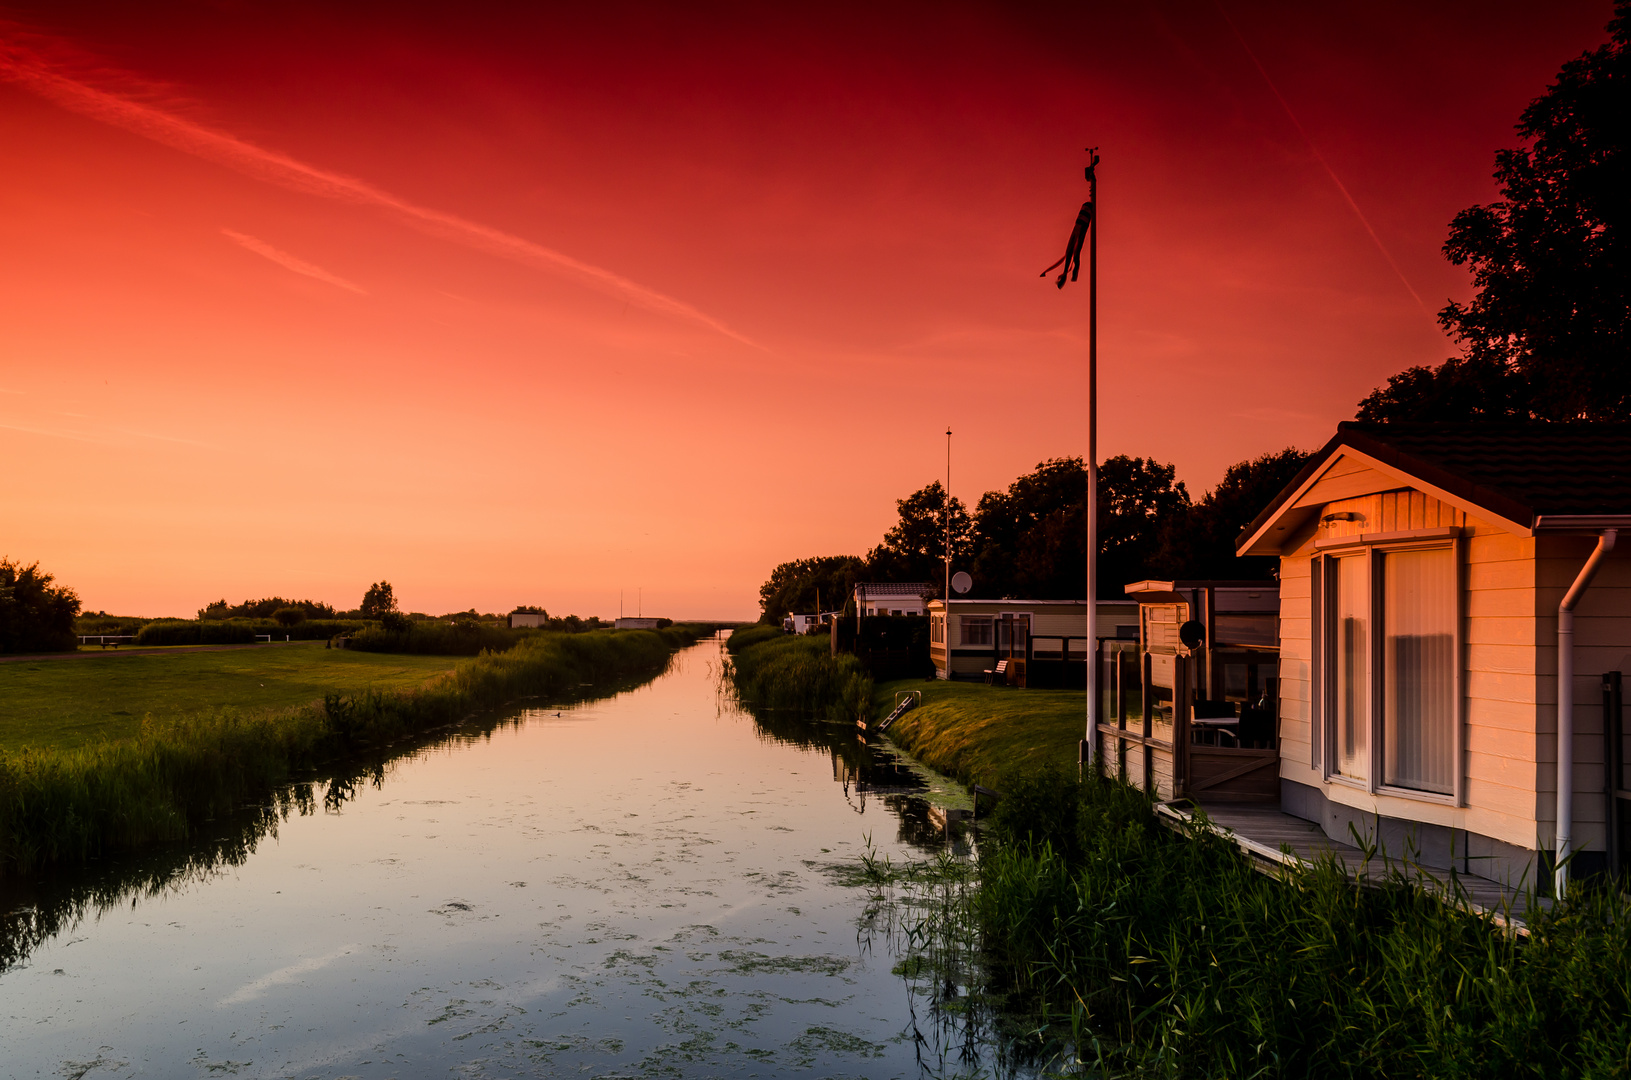 Sunset in the Netherland